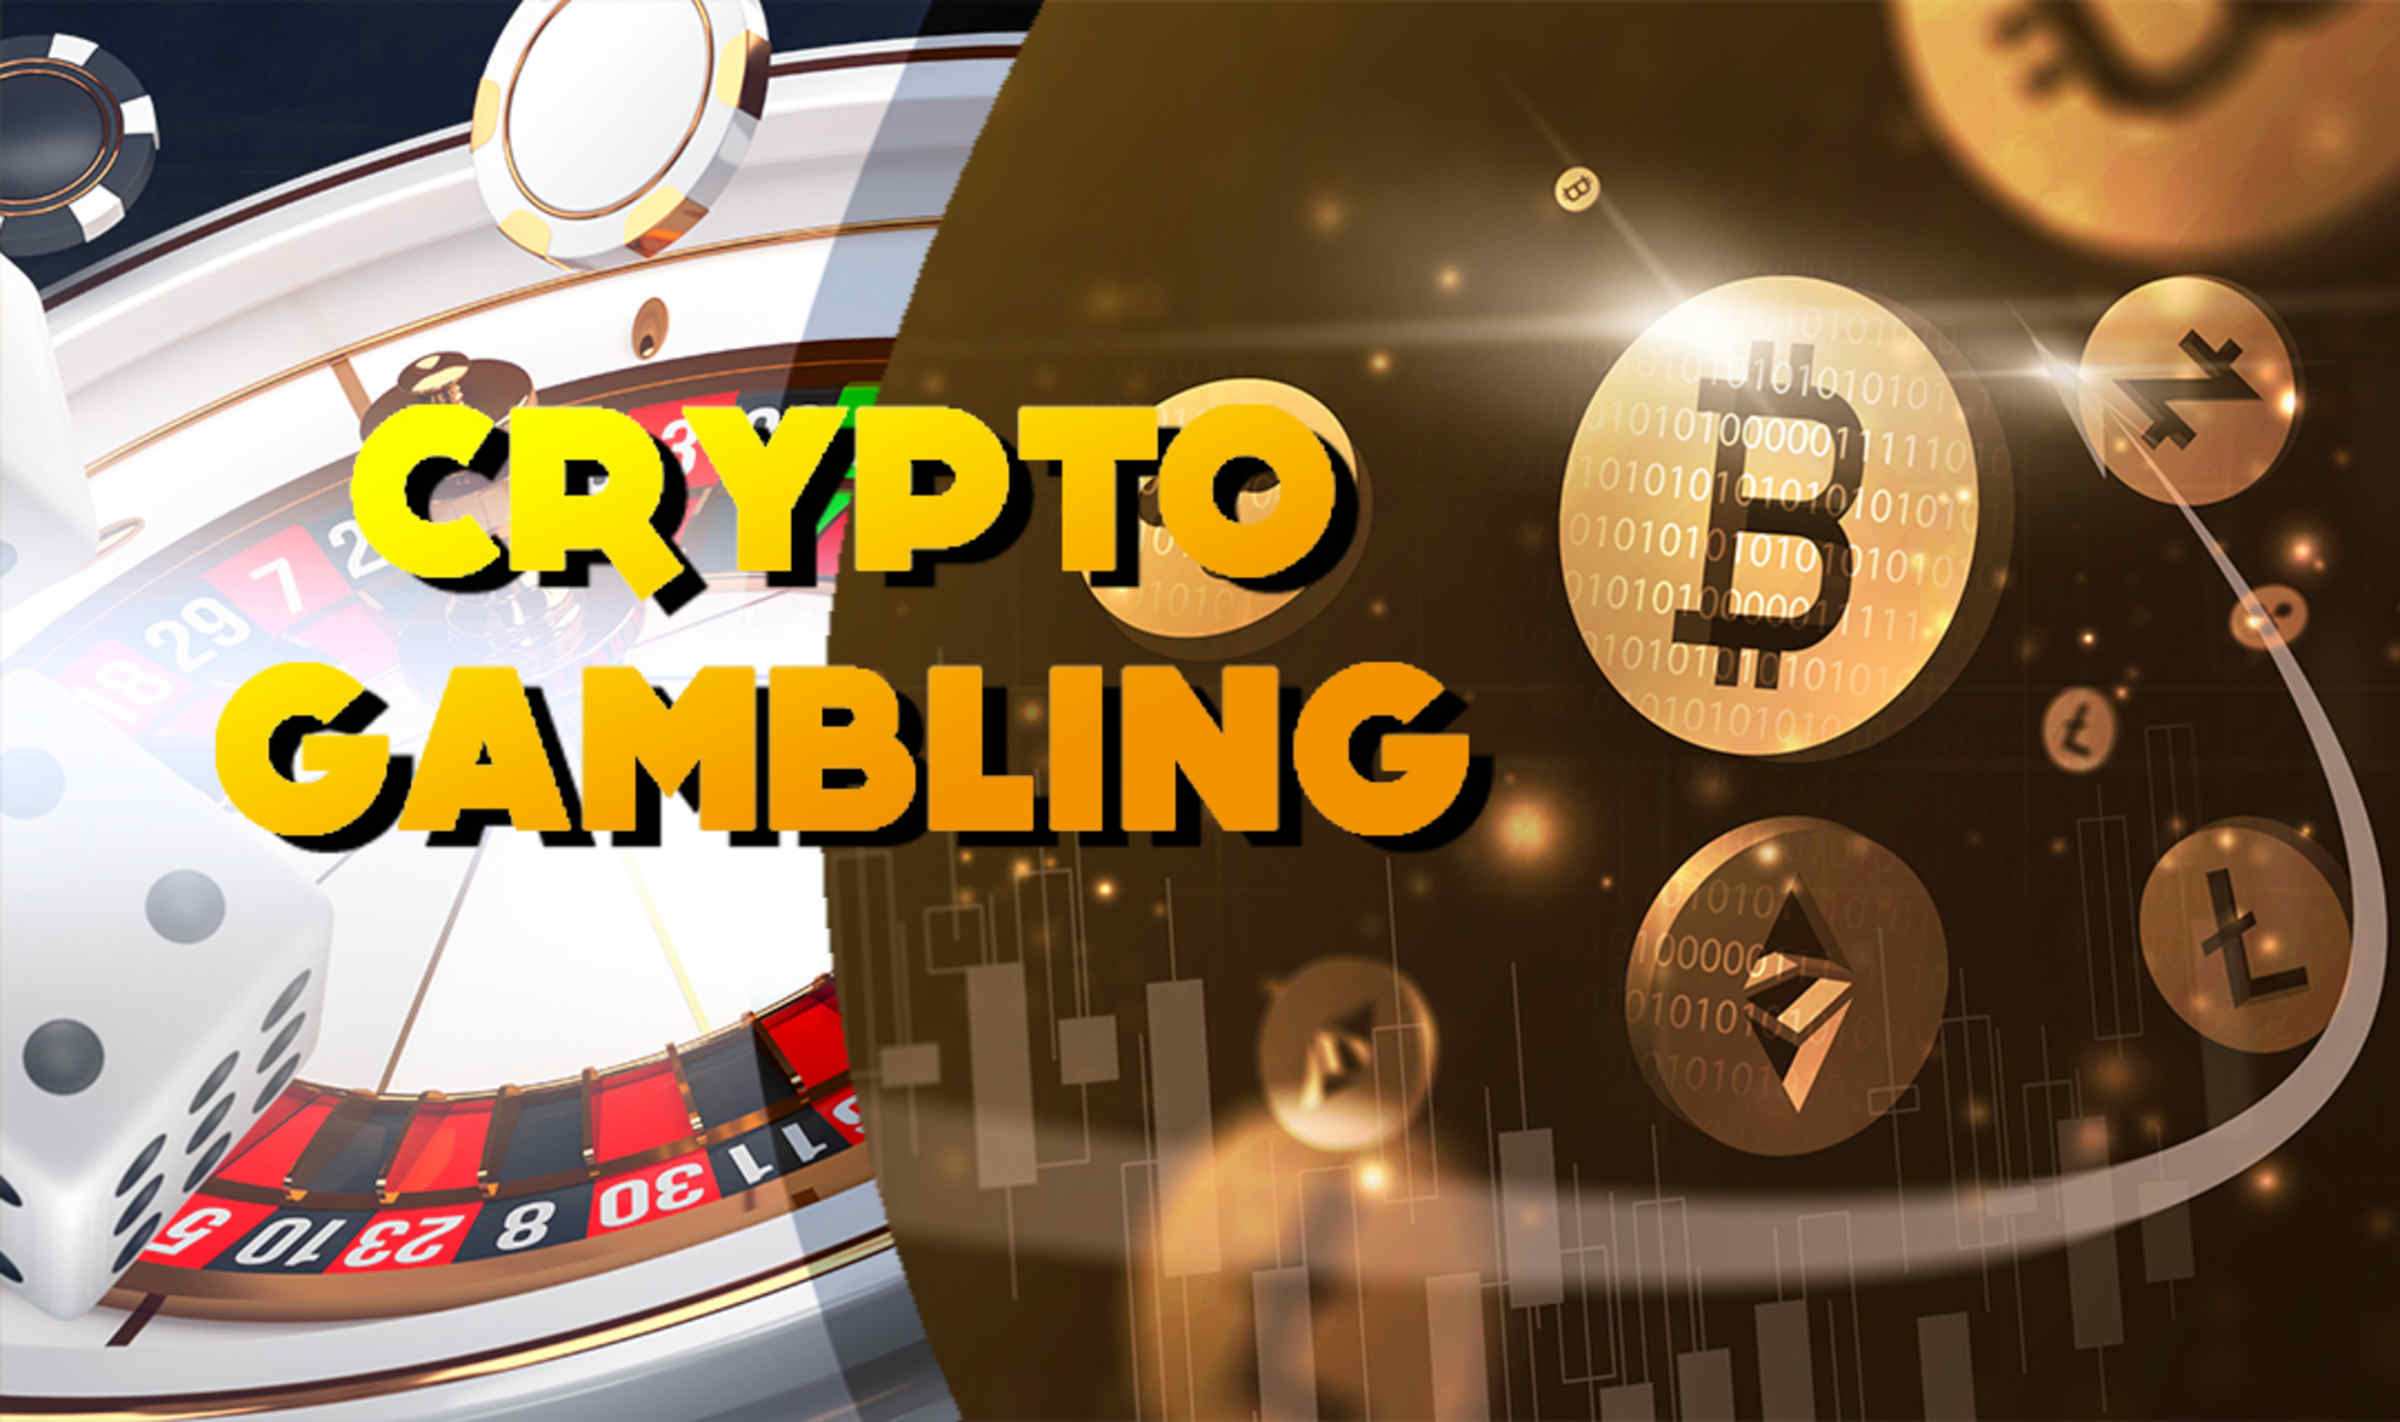 bitcoin games Consulting – What The Heck Is That?